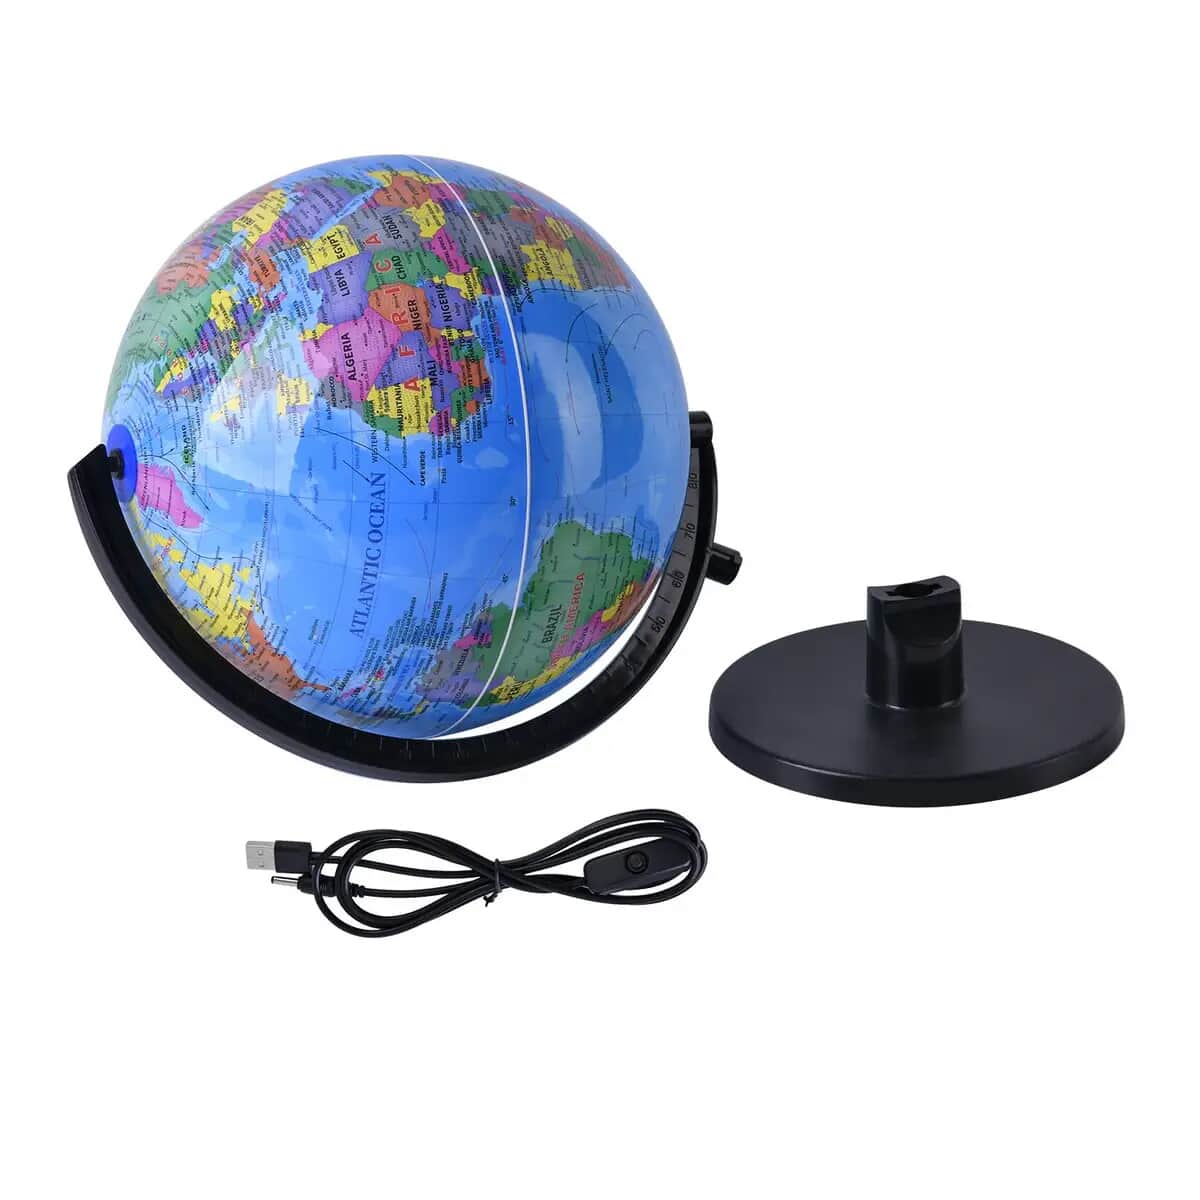 360 Degree Revolving Map of World Painted Globe with Light (USB) (14.5"X7") -Blue image number 0